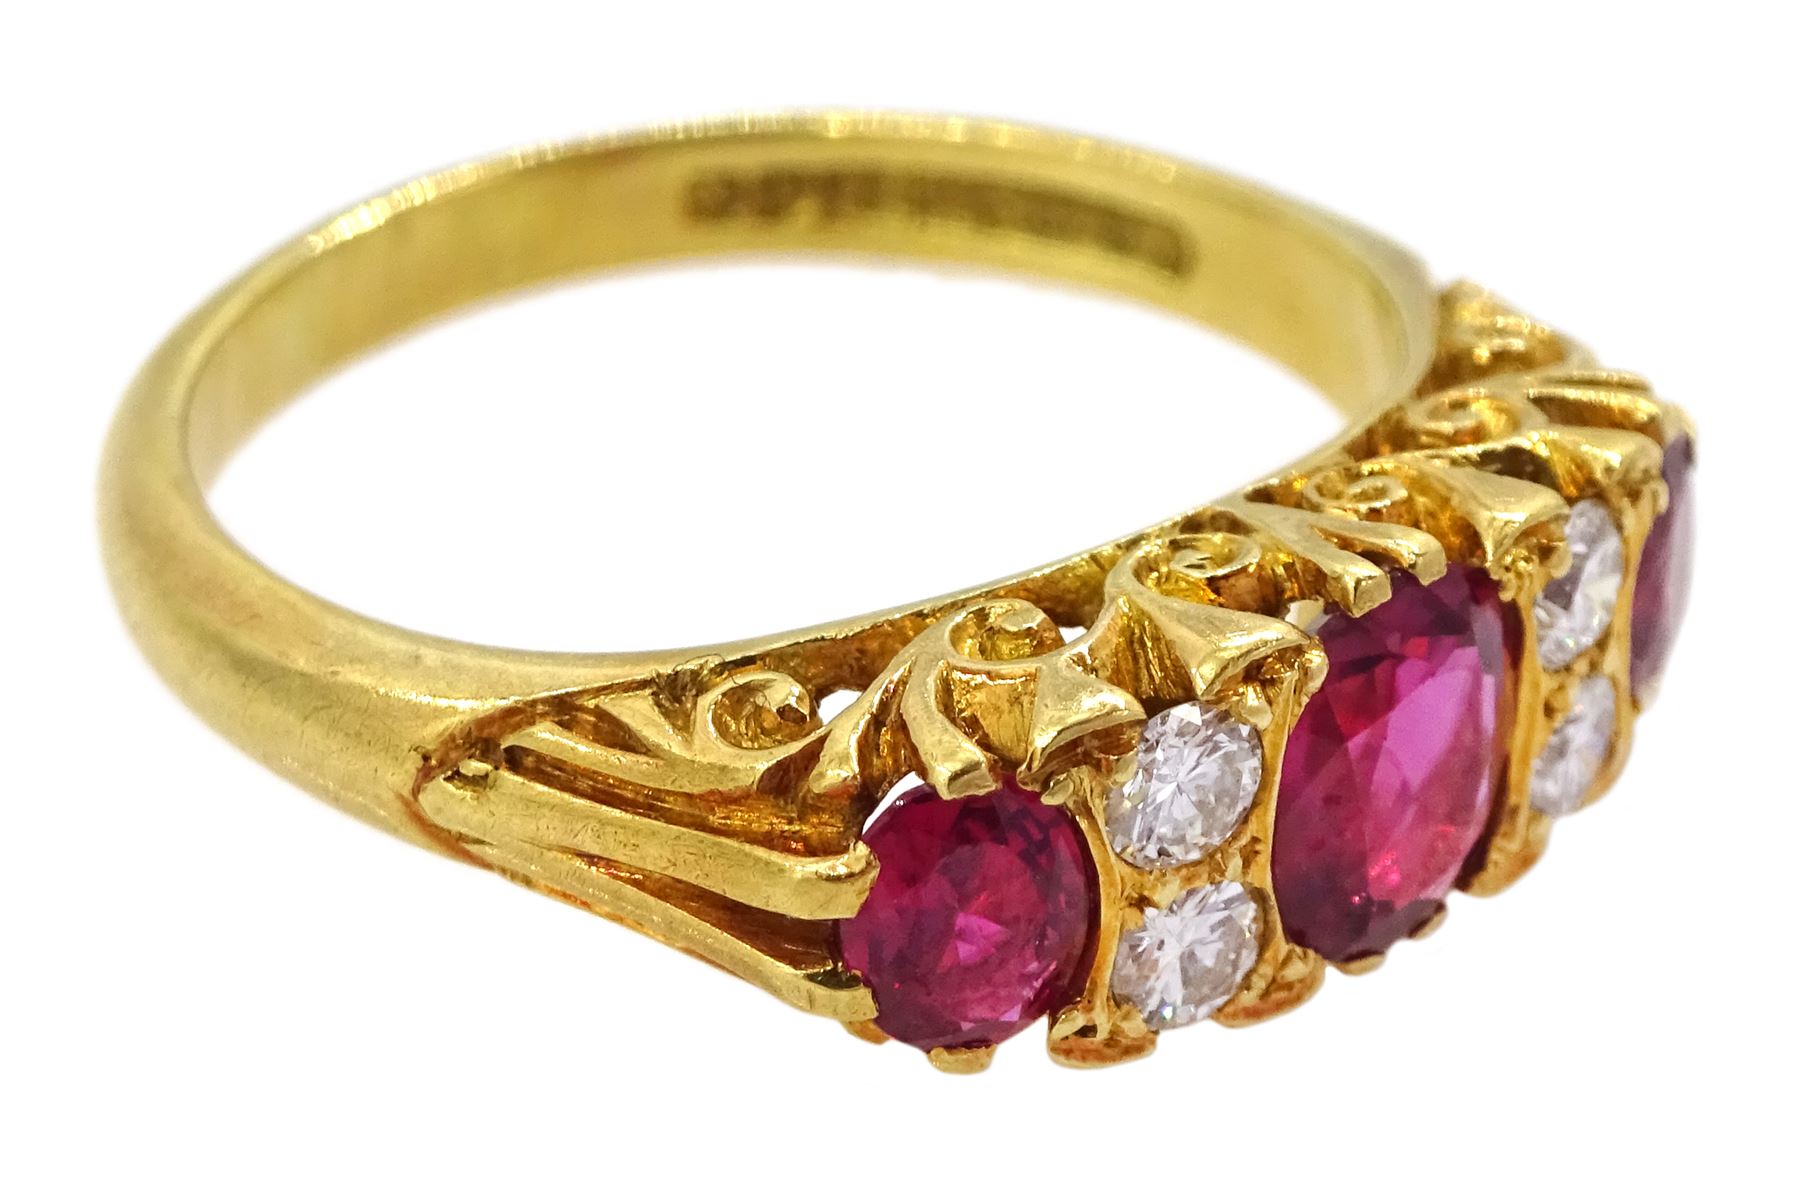 18ct gold three stone oval cut ruby and four stone round brilliant cut diamond ring - Image 3 of 4